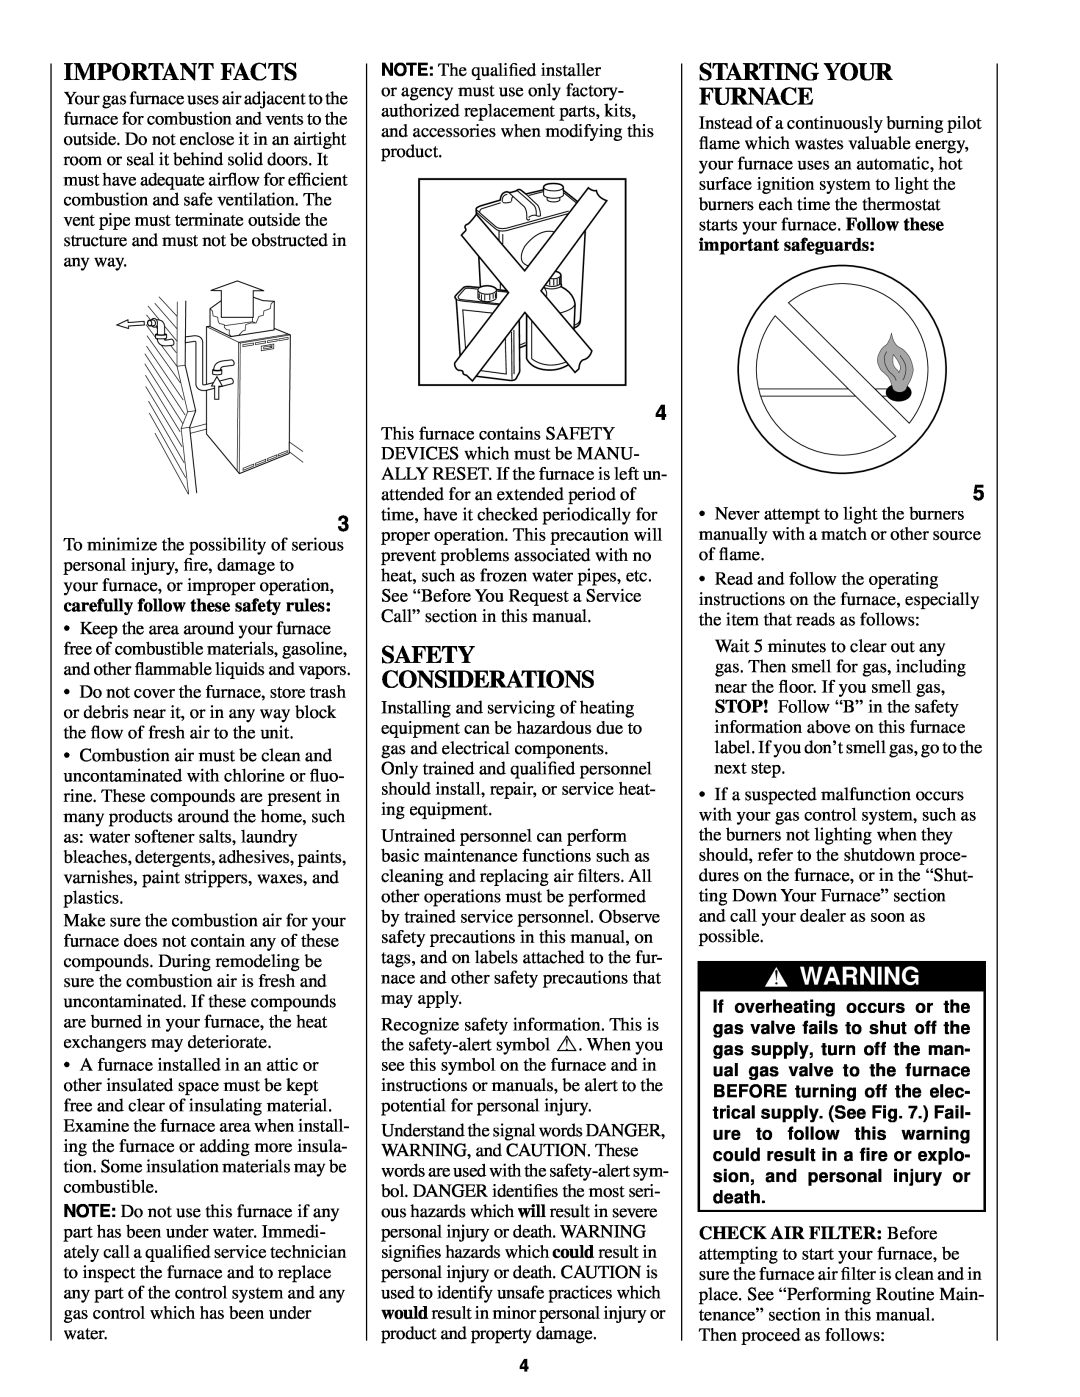 Bryant 345MAV manual Important Facts, Safety Considerations, Starting Your Furnace 